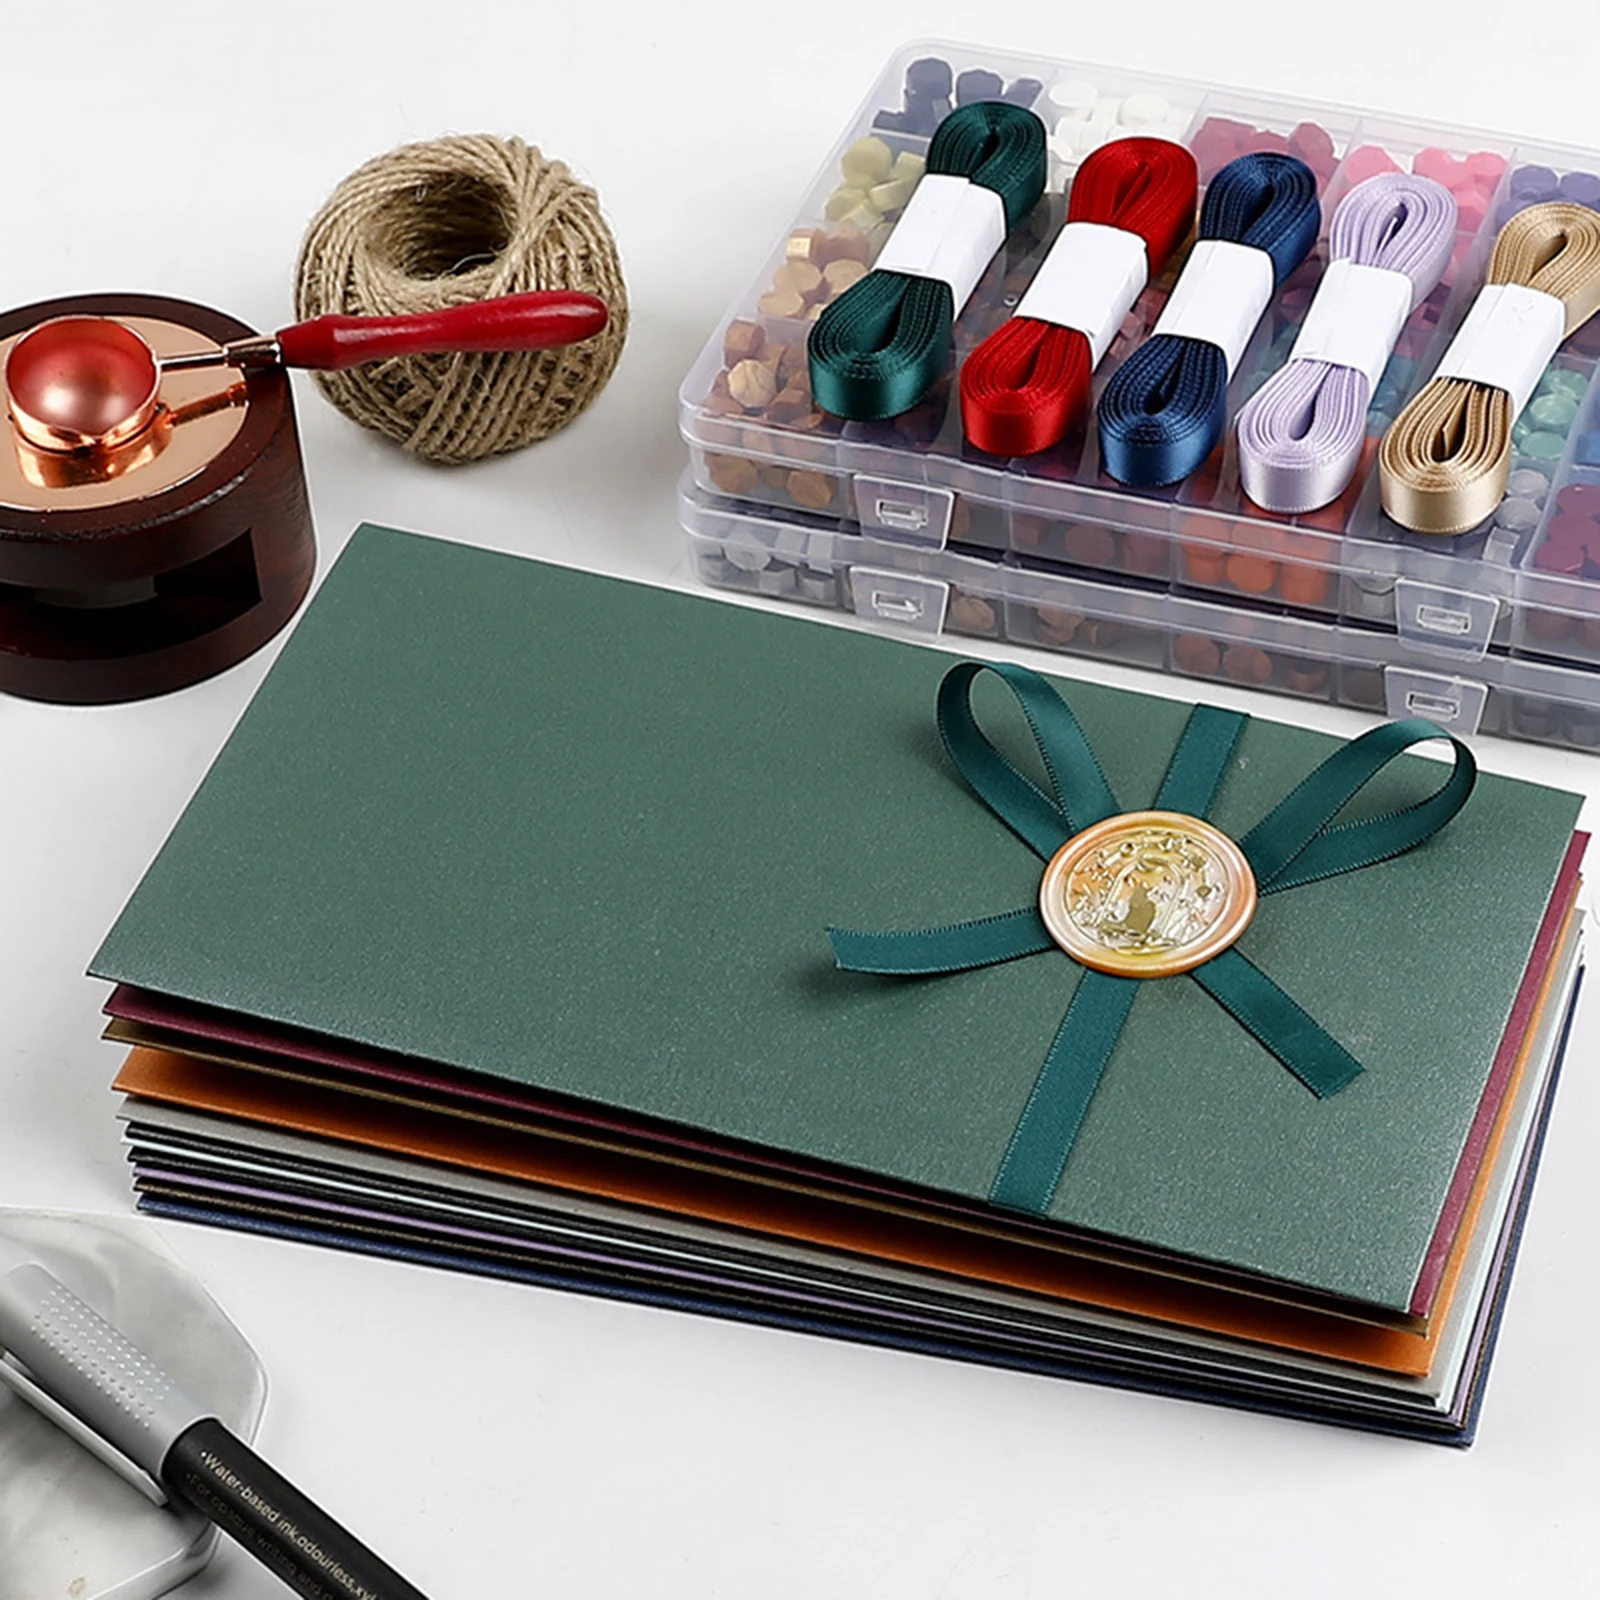 Details about   DIY Vintage Detachable Spoon Stamp Set Box with Sealing Wax Beads Candle Craft 